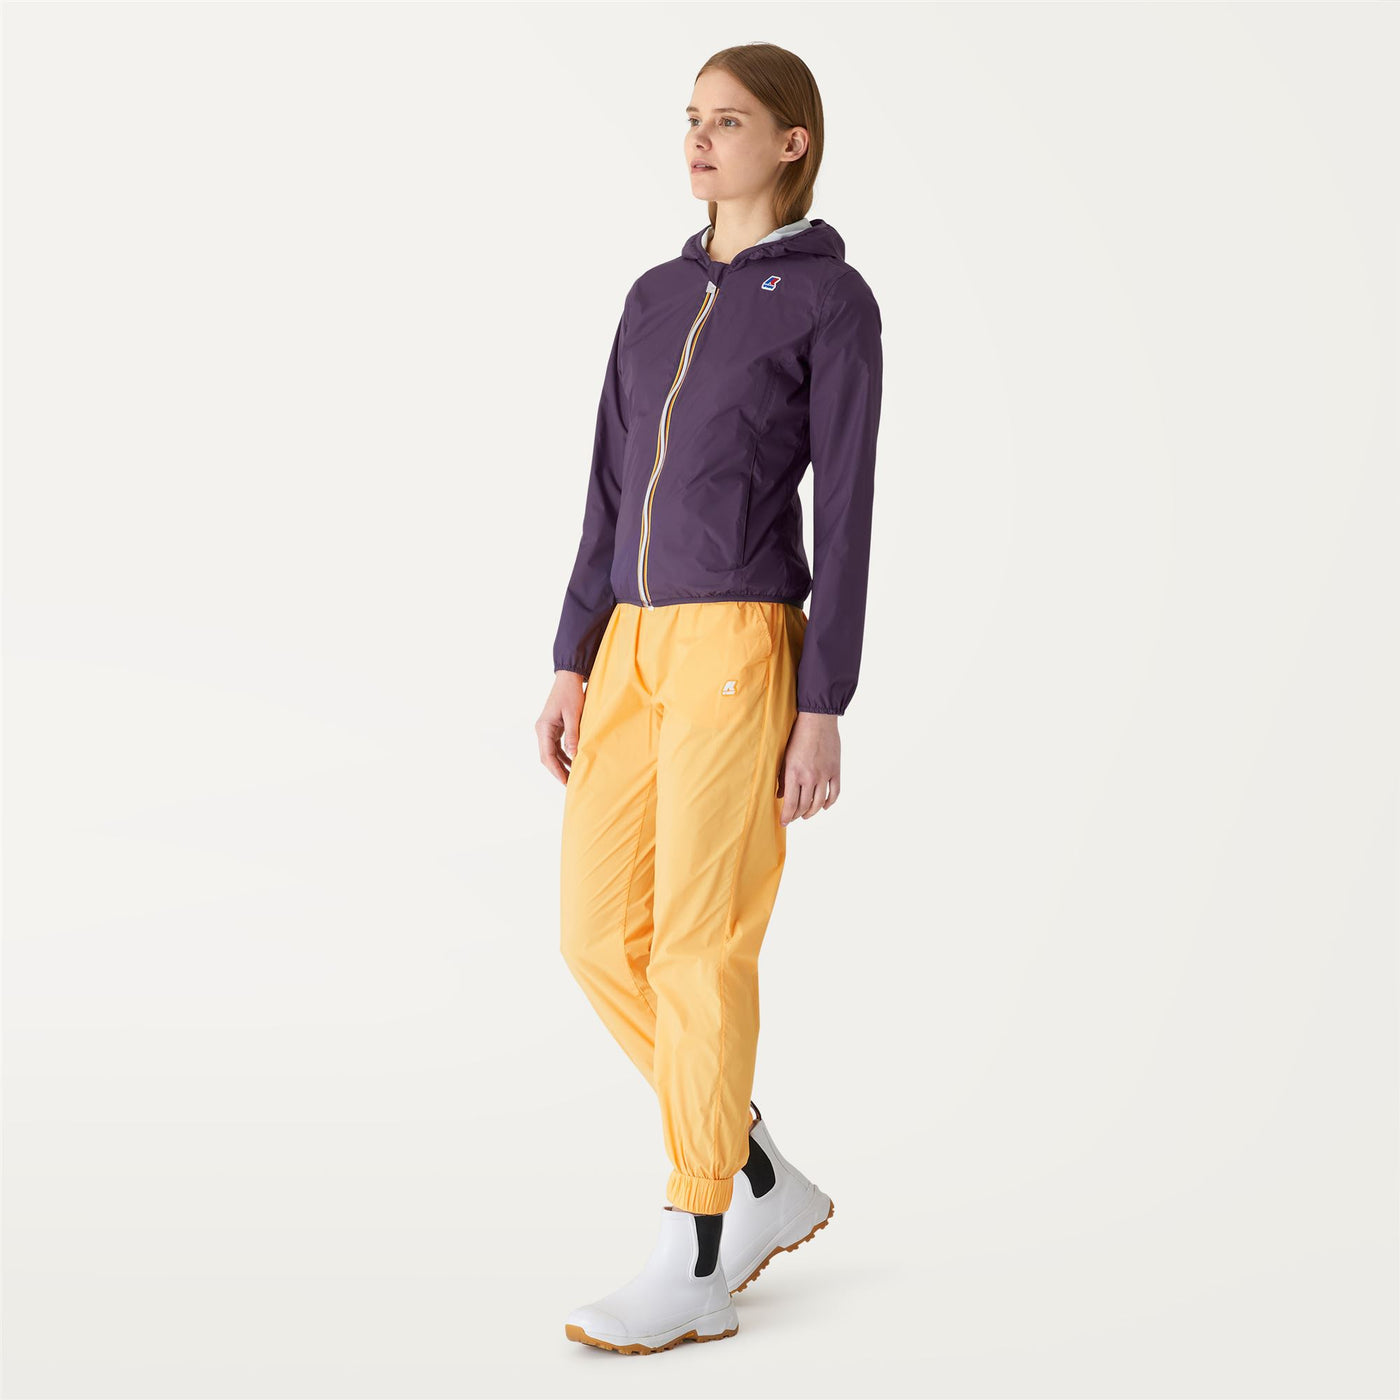 Jackets Woman LILY PLUS.2 DOUBLE Short VIOLET - WHITE | kway Detail (jpg Rgb)			